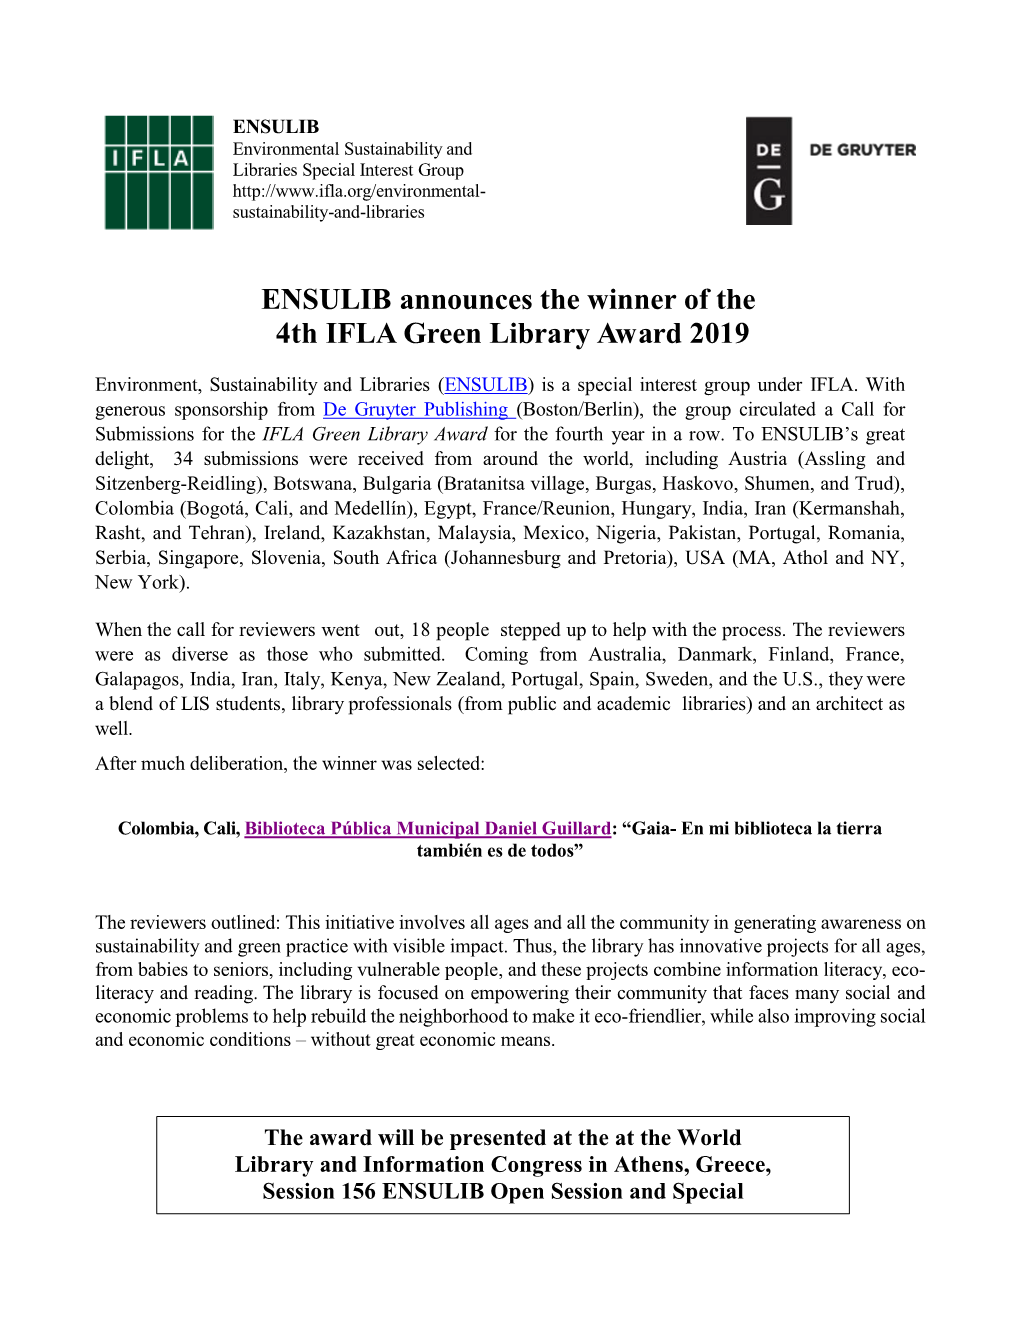 ENSULIB Announces the Winner of the 4Th IFLA Green Library Award 2019